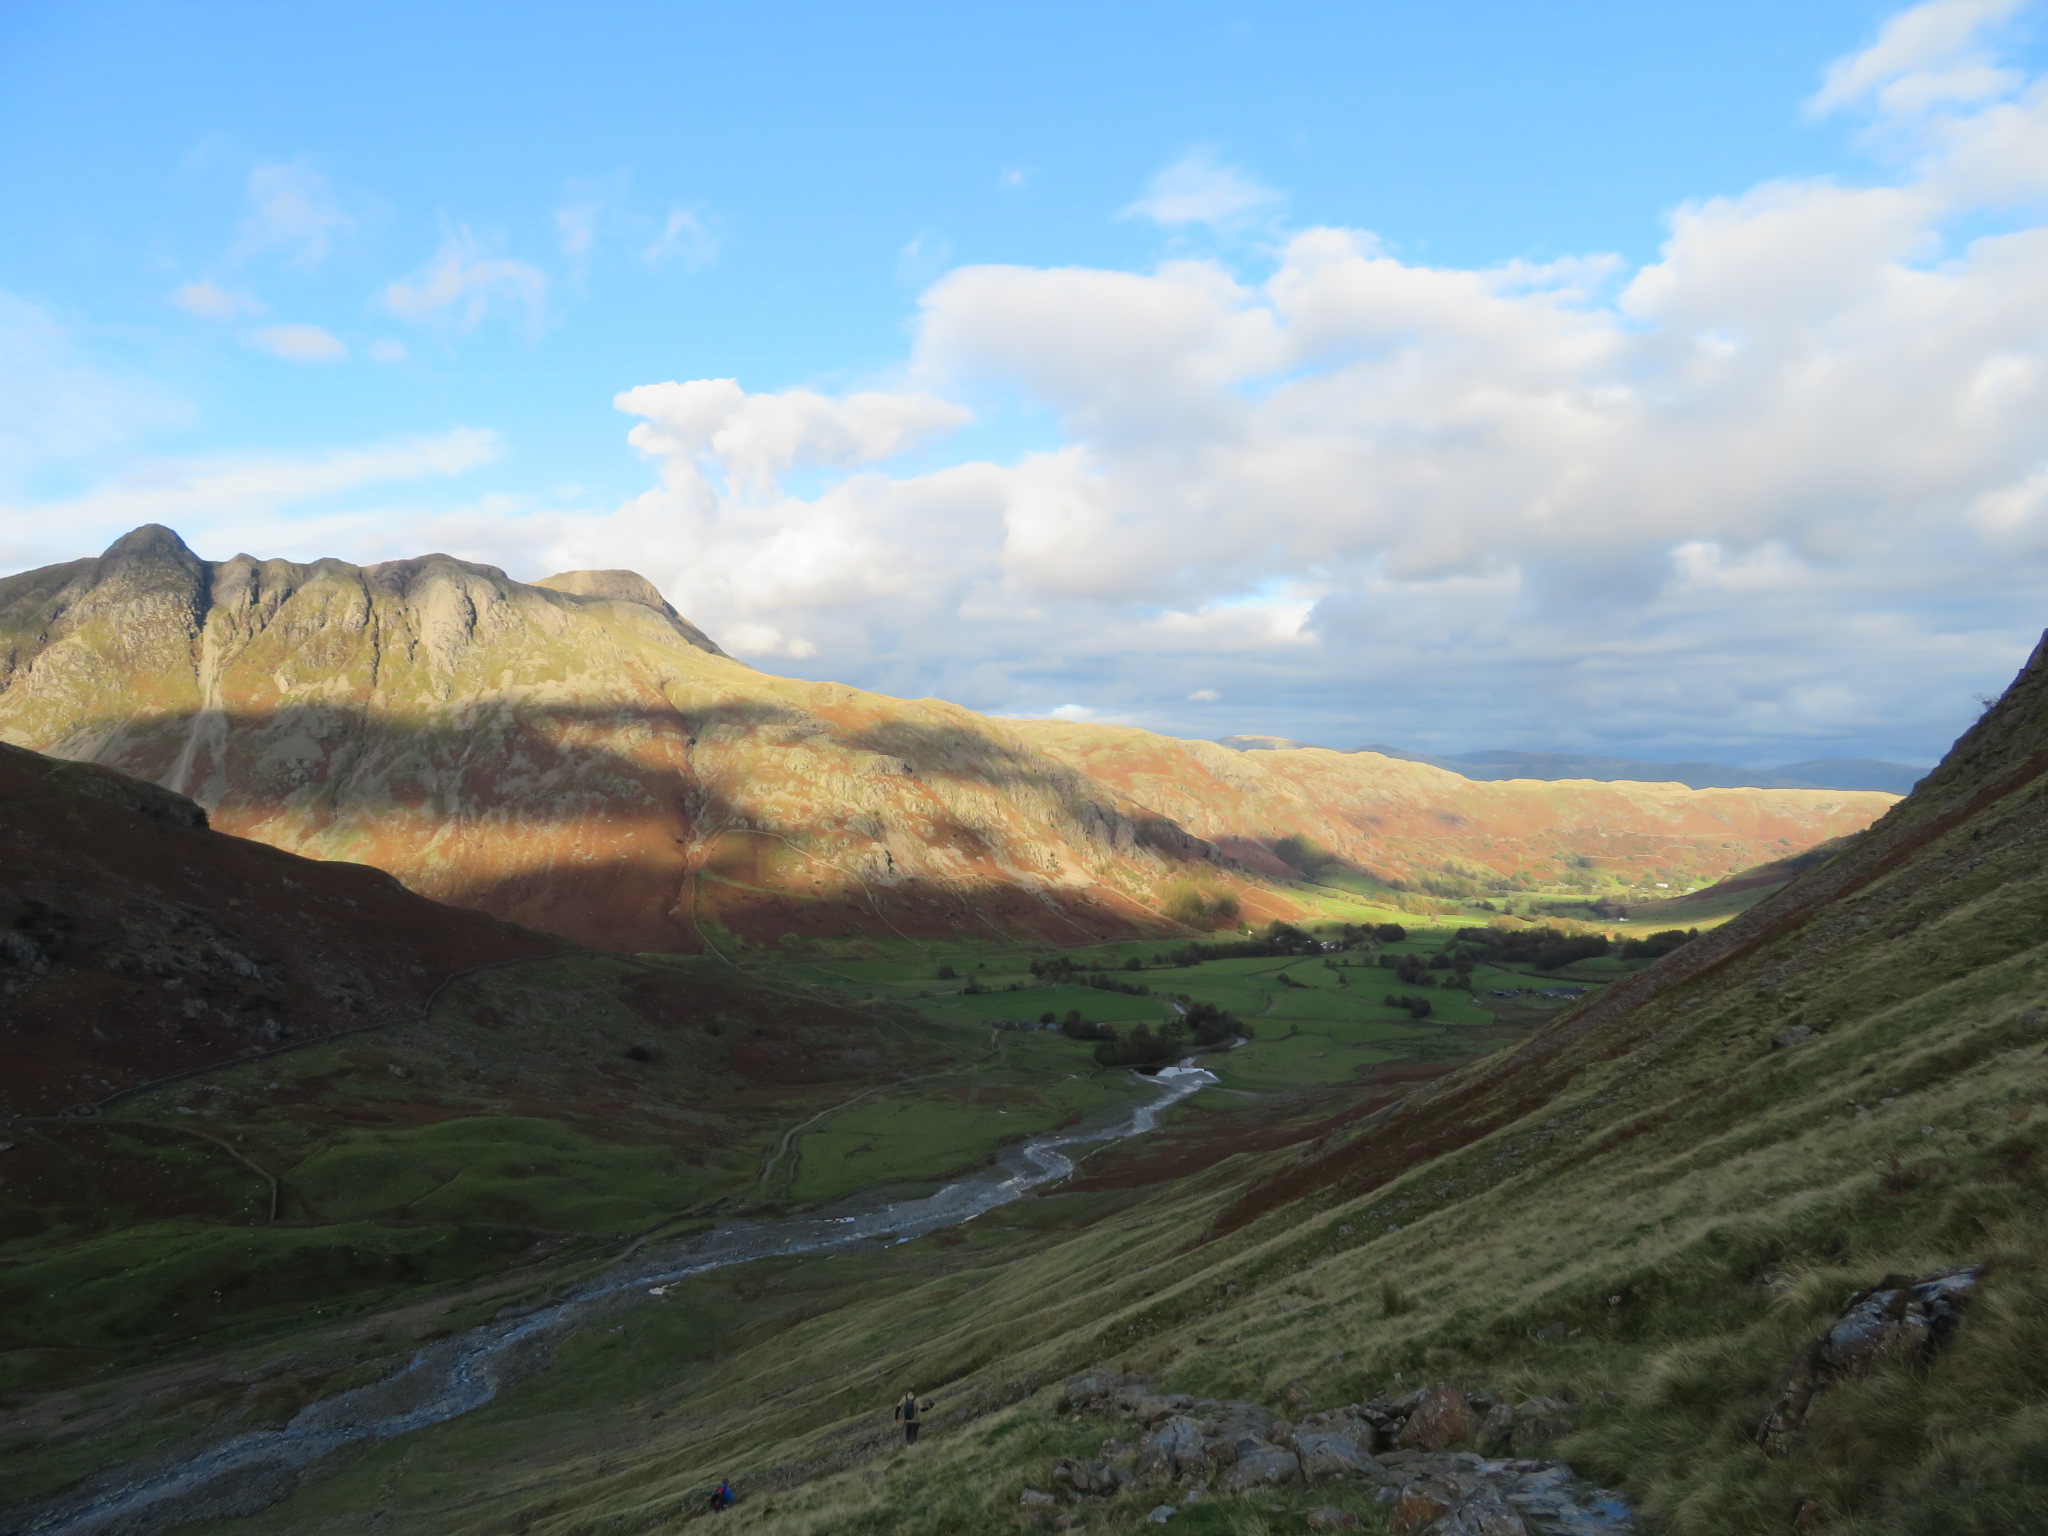 The Old Man of Coniston: Langdale Pikes and Gt L valley from Pike of Blisco flank - © William Mackesy